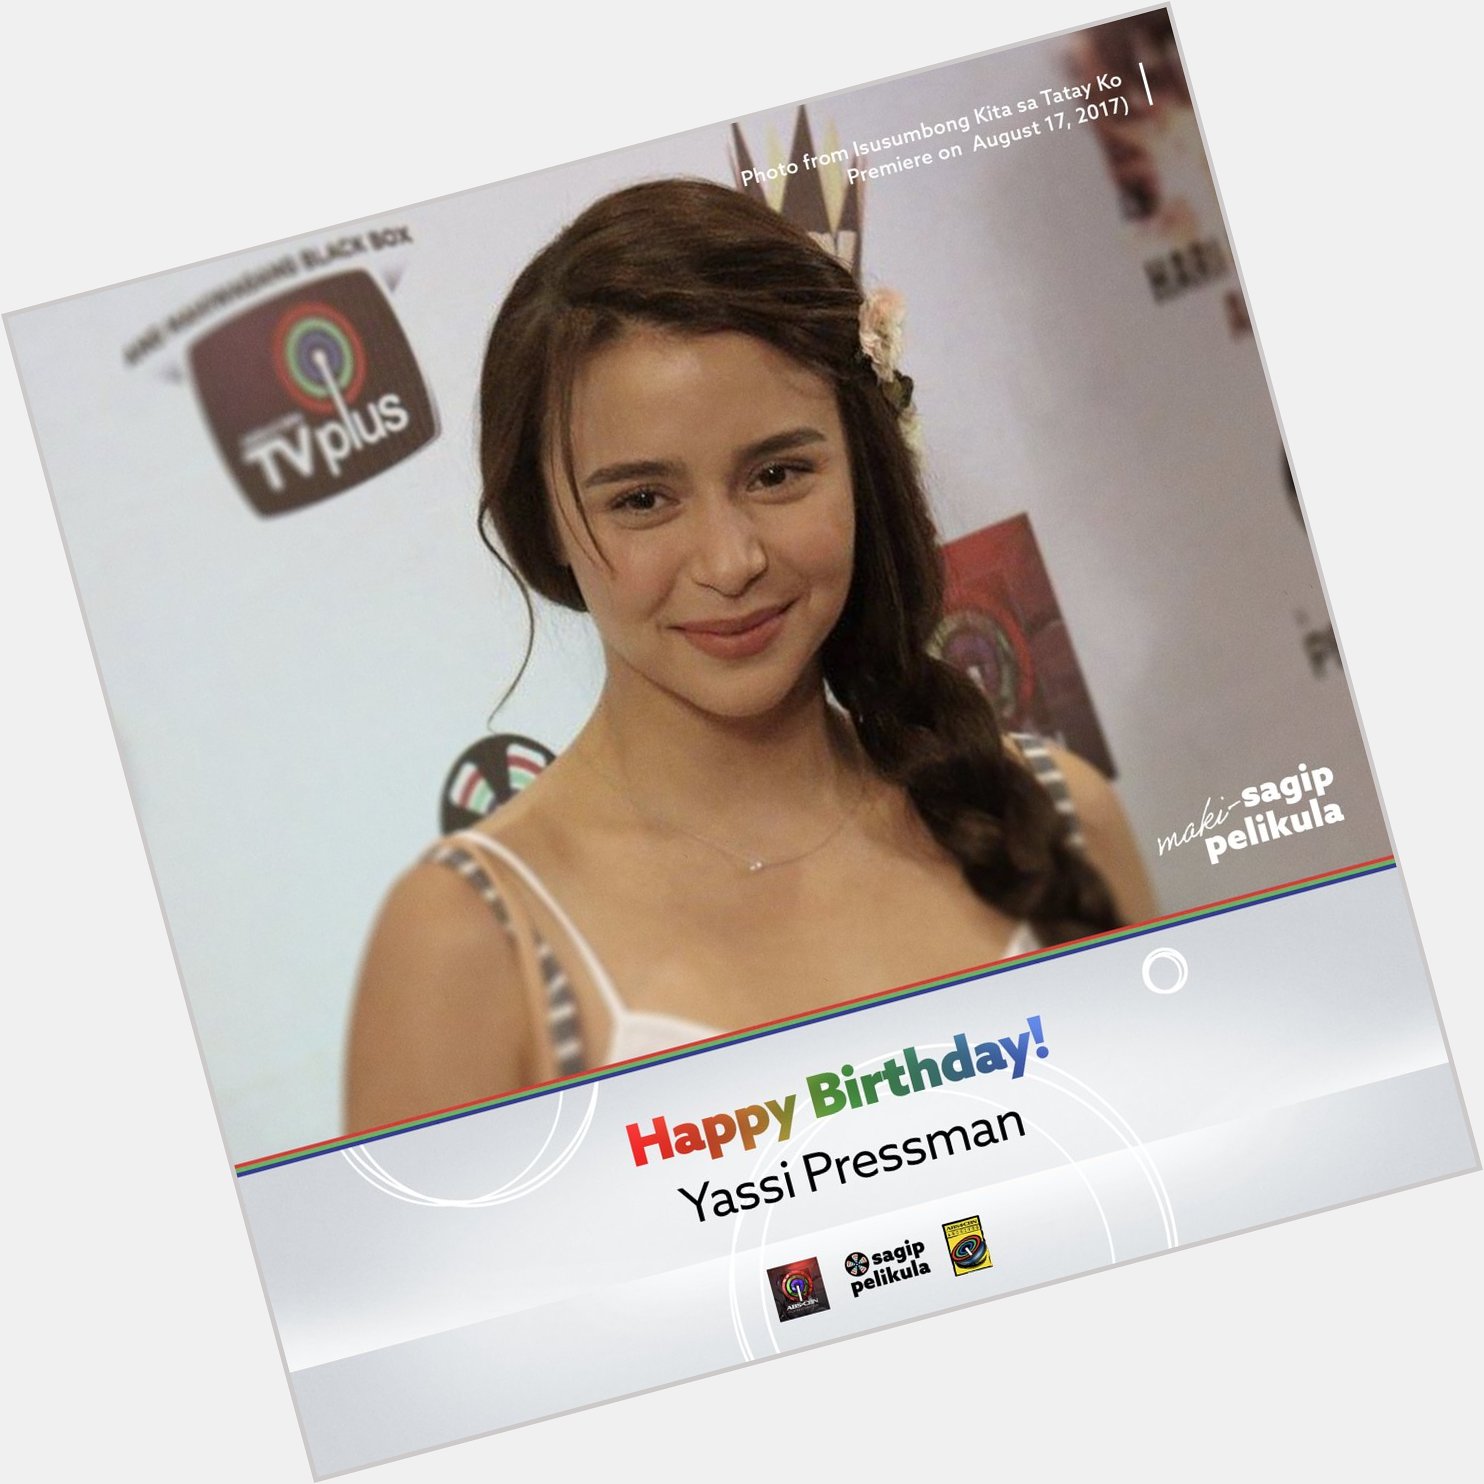 Happy birthday to Yassi Pressman!

What\s your favorite film of hers?  